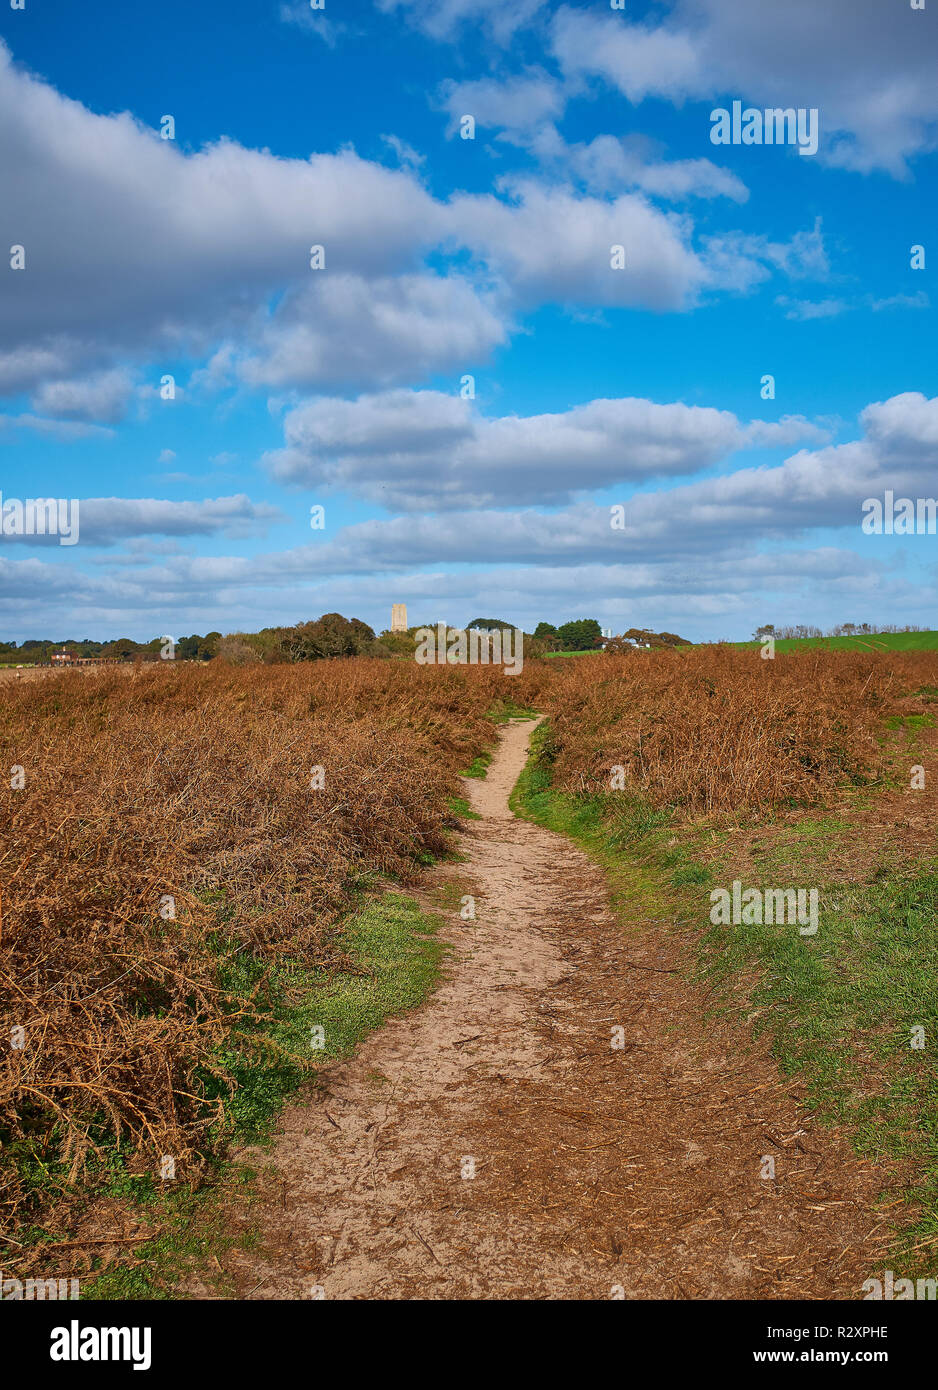 A path leading through a field of bracken that has turned brown due to autumn with St Andrews church at Covehithe in the distance, Suffolk, England,UK Stock Photo